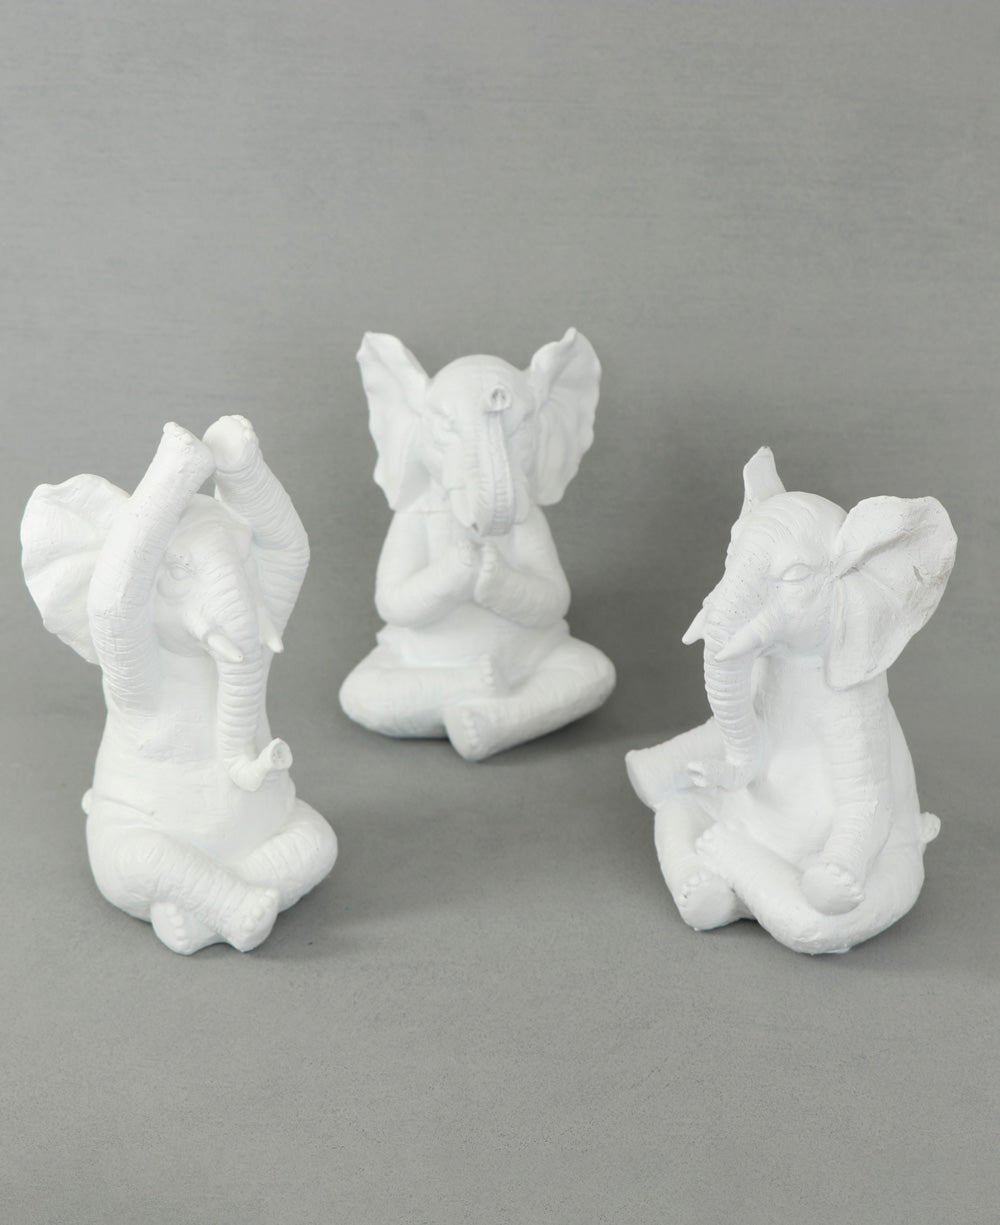 White Yoga Elephant Trio: Expressions of Peace - Sculptures & Statues